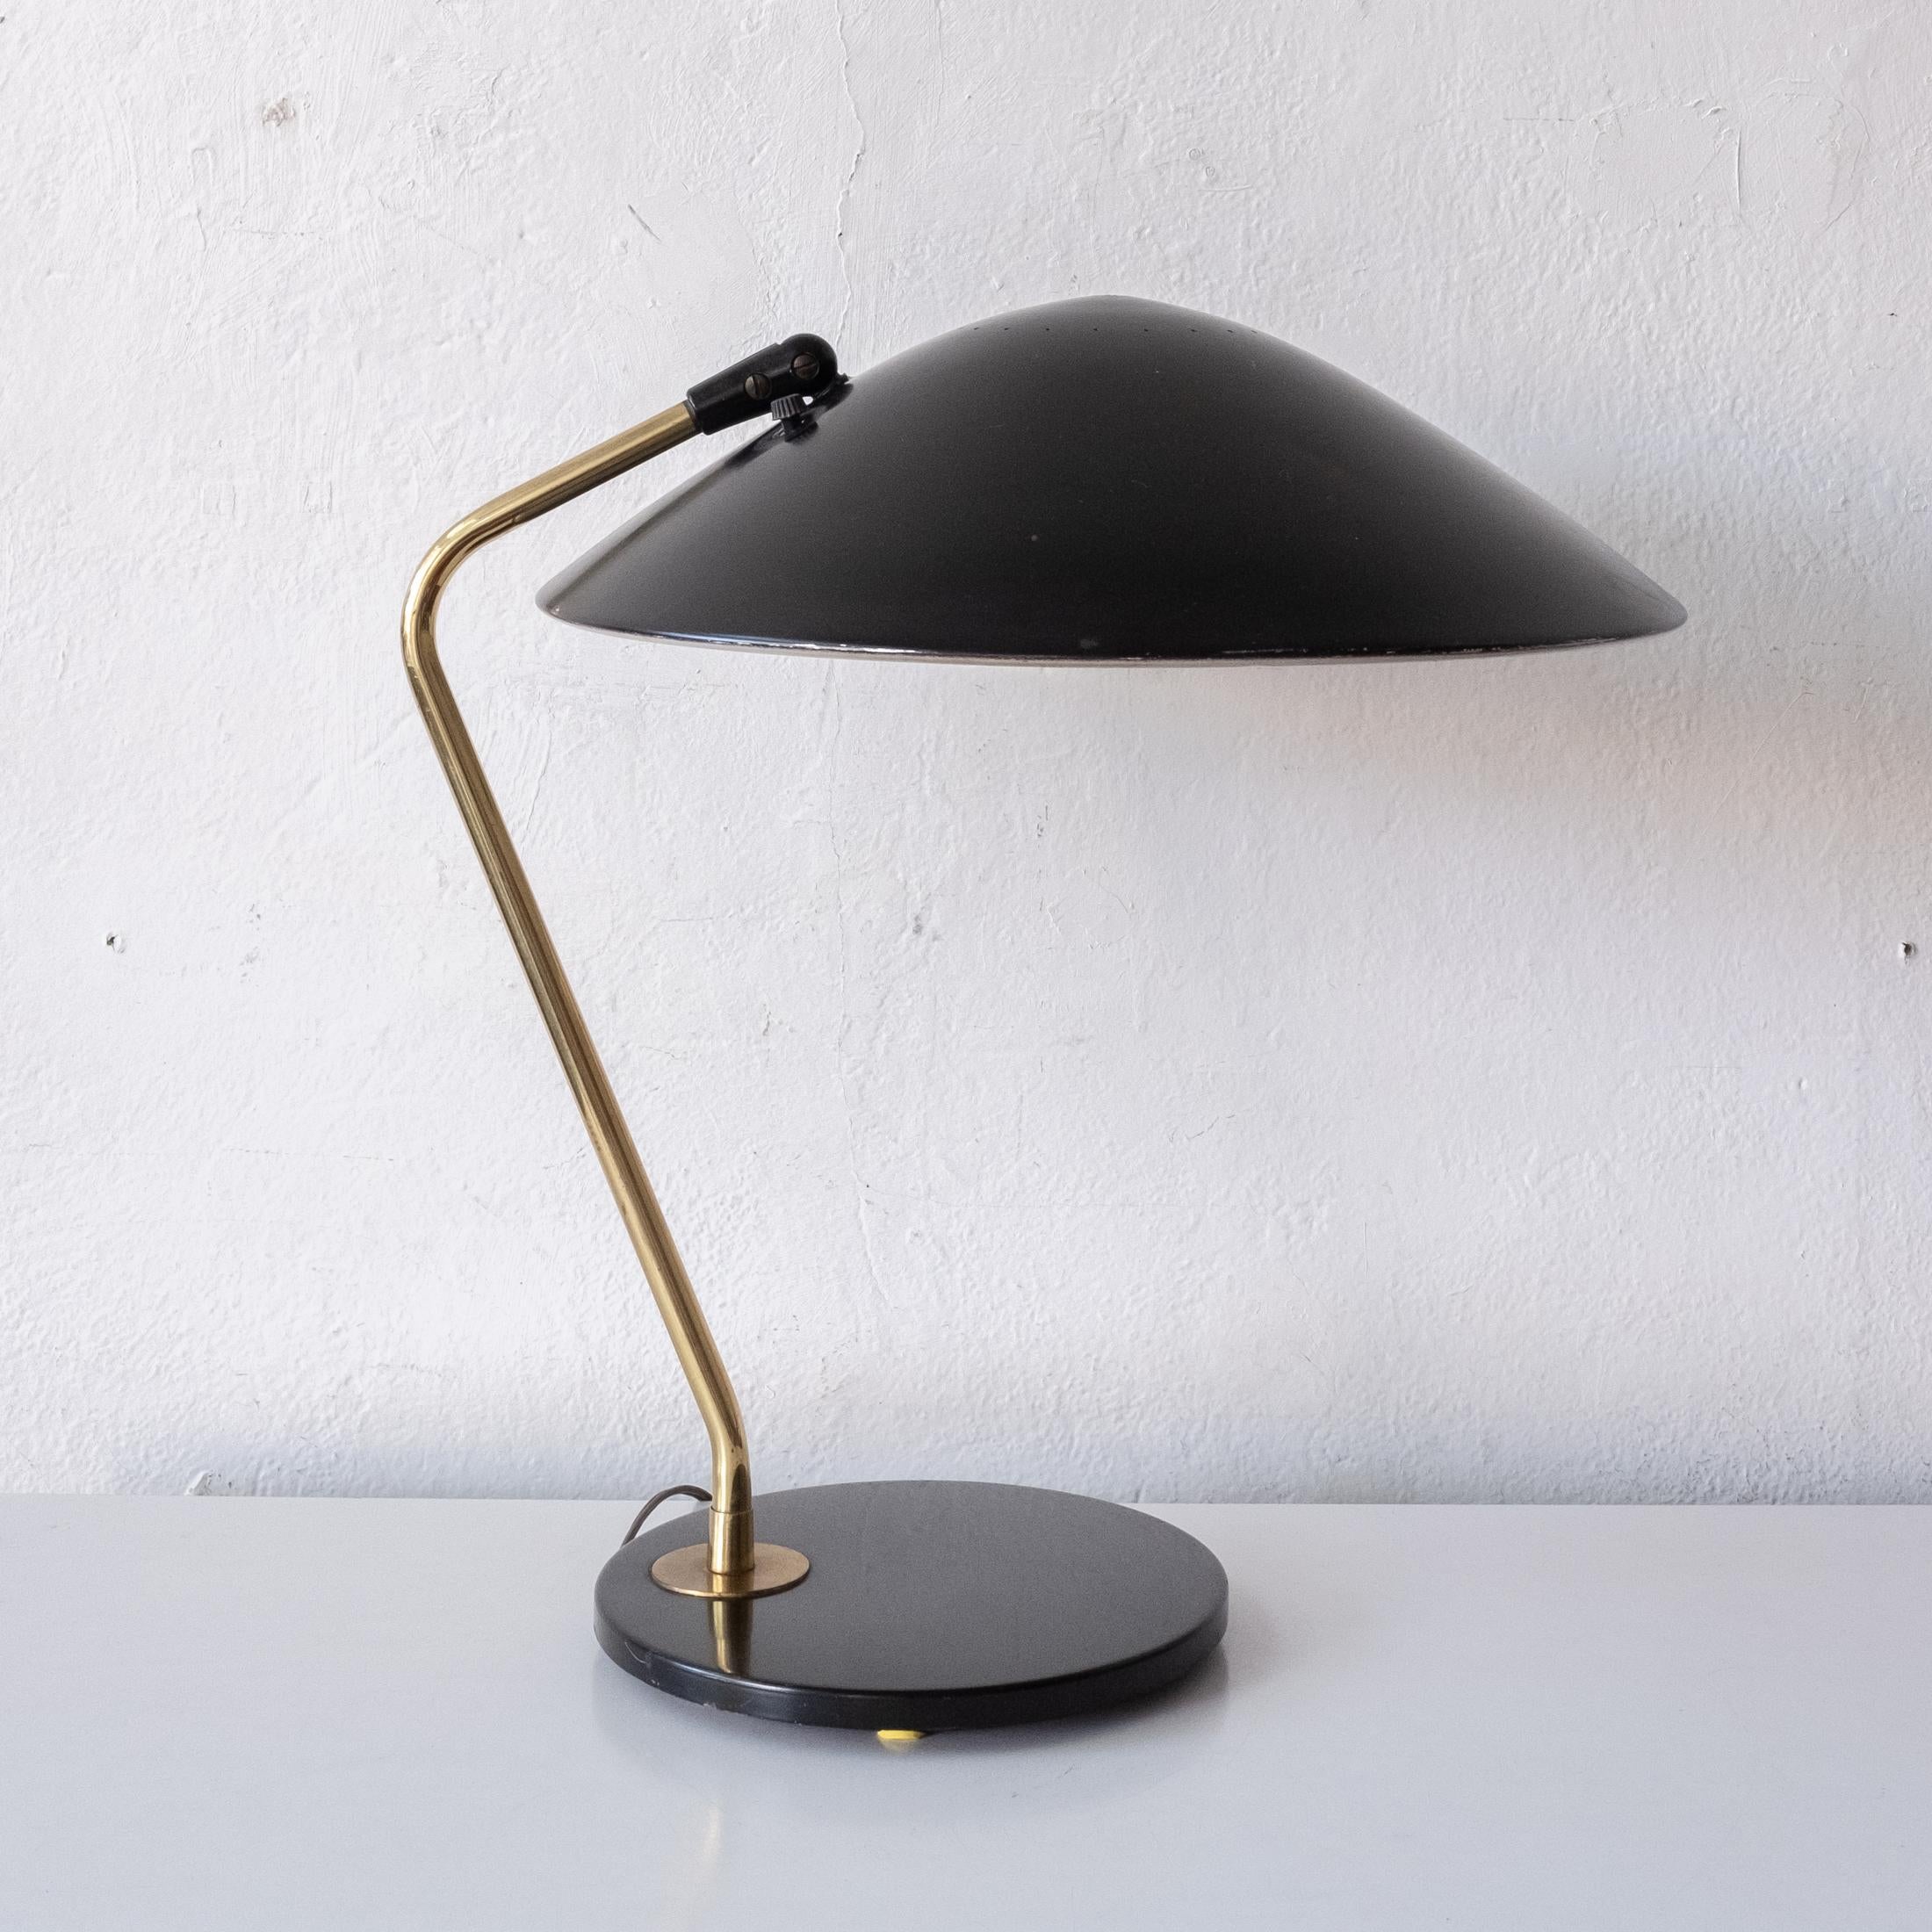 Gerald Thurston for Lightolier desk or table lamp. Black enameled metal with brass. Fully adjustable shade. Great quality. 